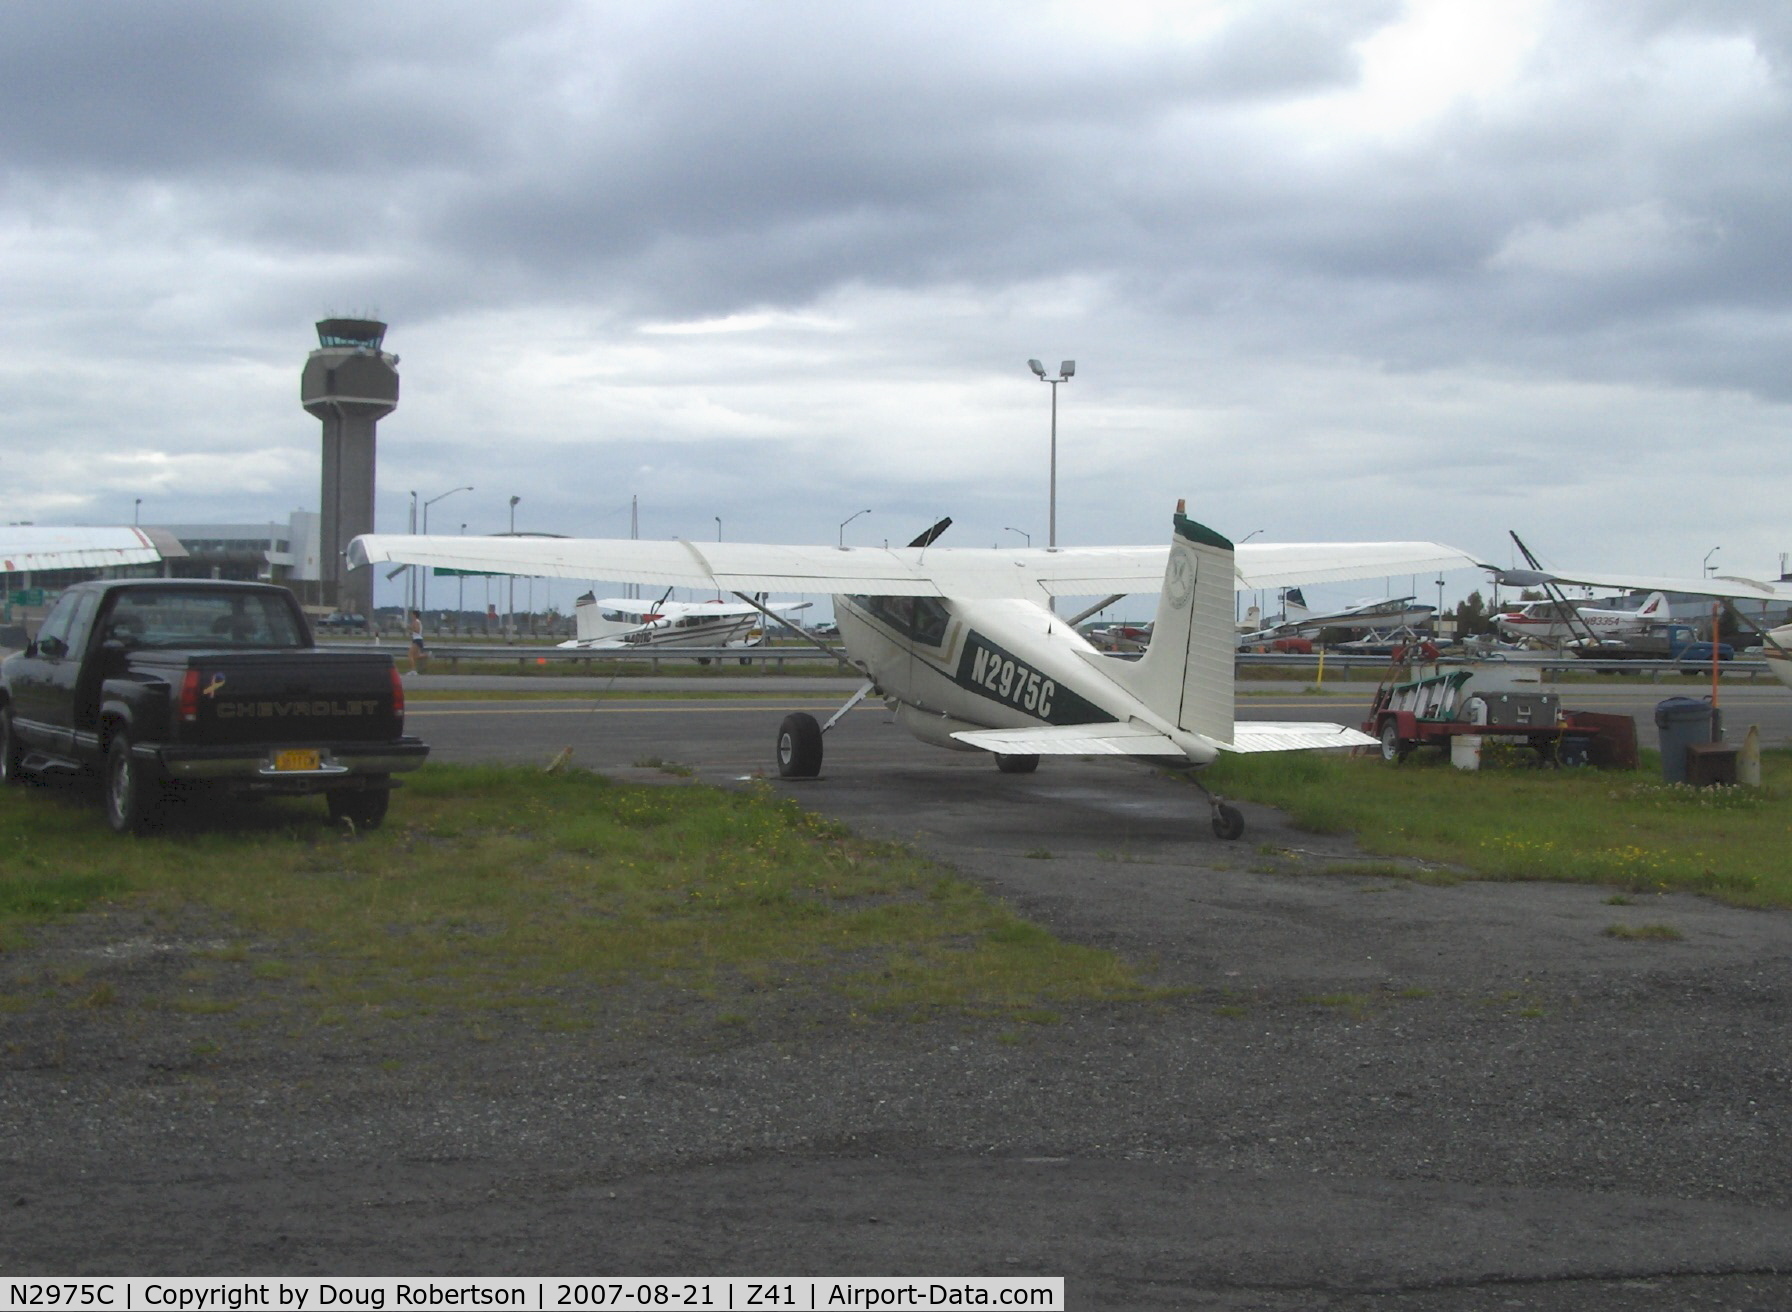 N2975C, 1954 Cessna 180 C/N 30875, 1954 Cessna 180 SKYWAGON, Continental O-470 230 Hp upgrade, ANC Tower in background